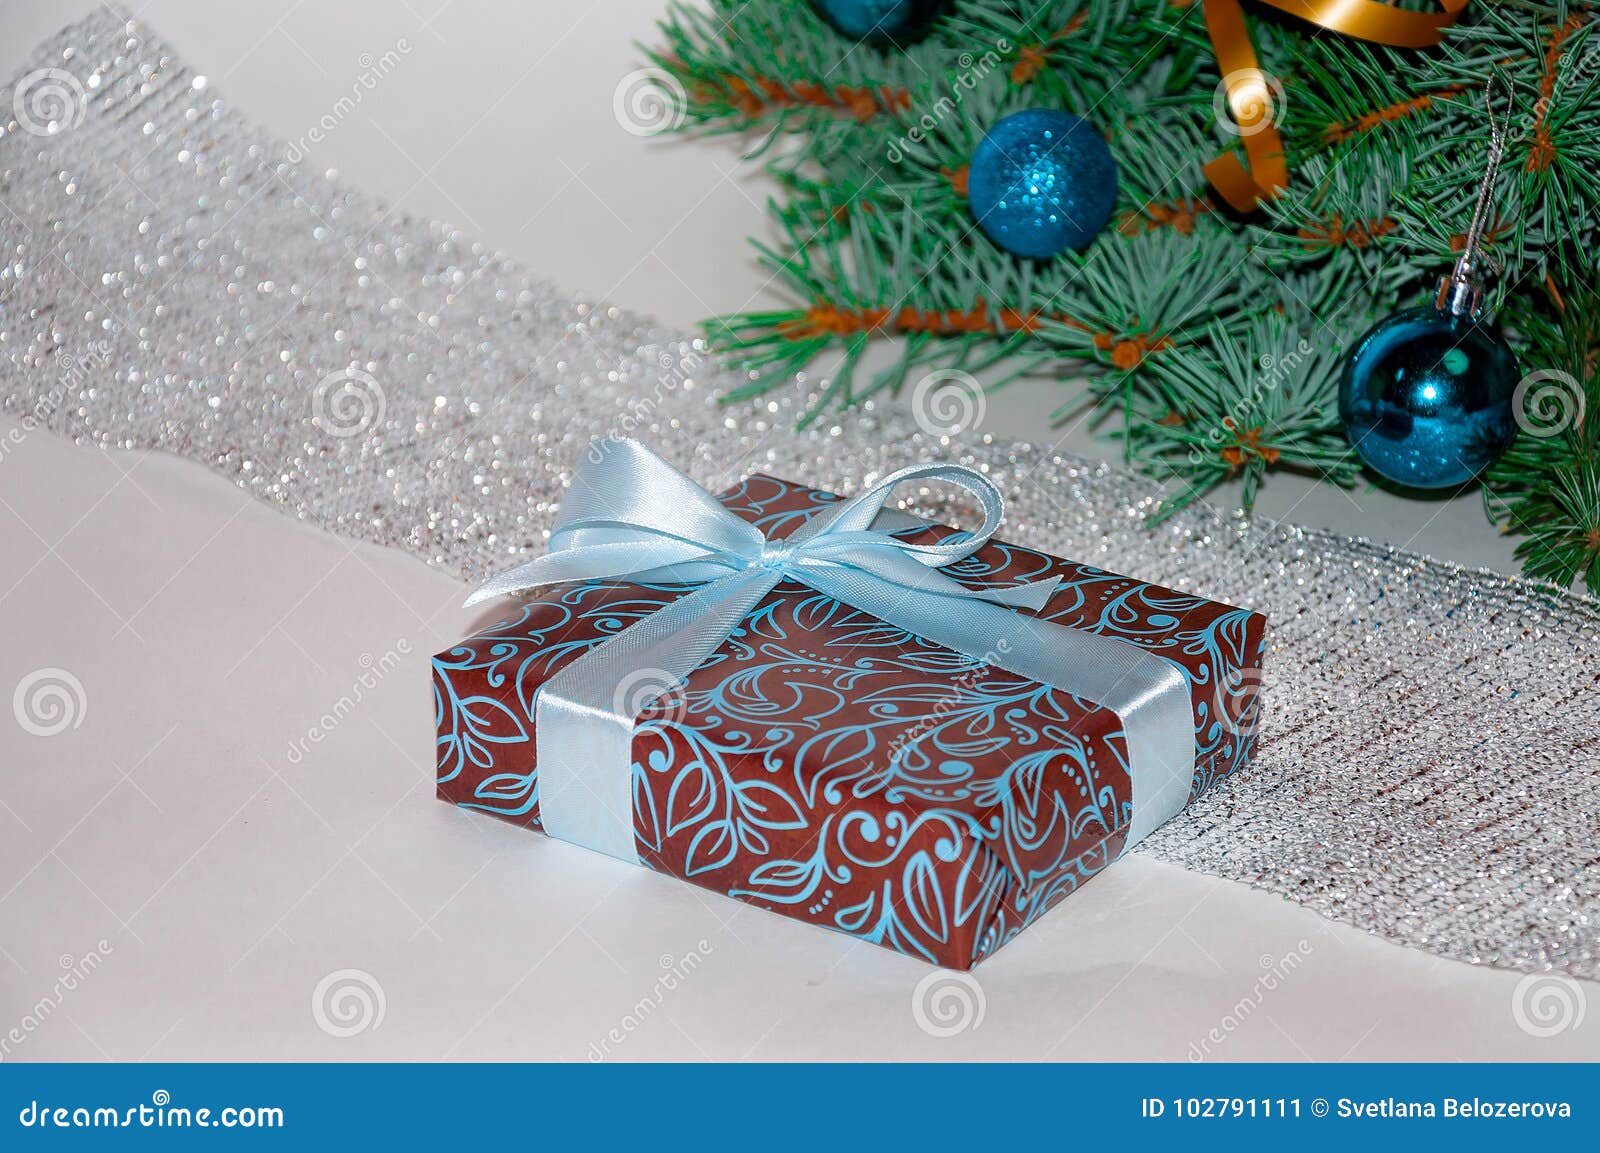 Download New Year Background Christmas position Christmas Gift Under The Christmas Tree A